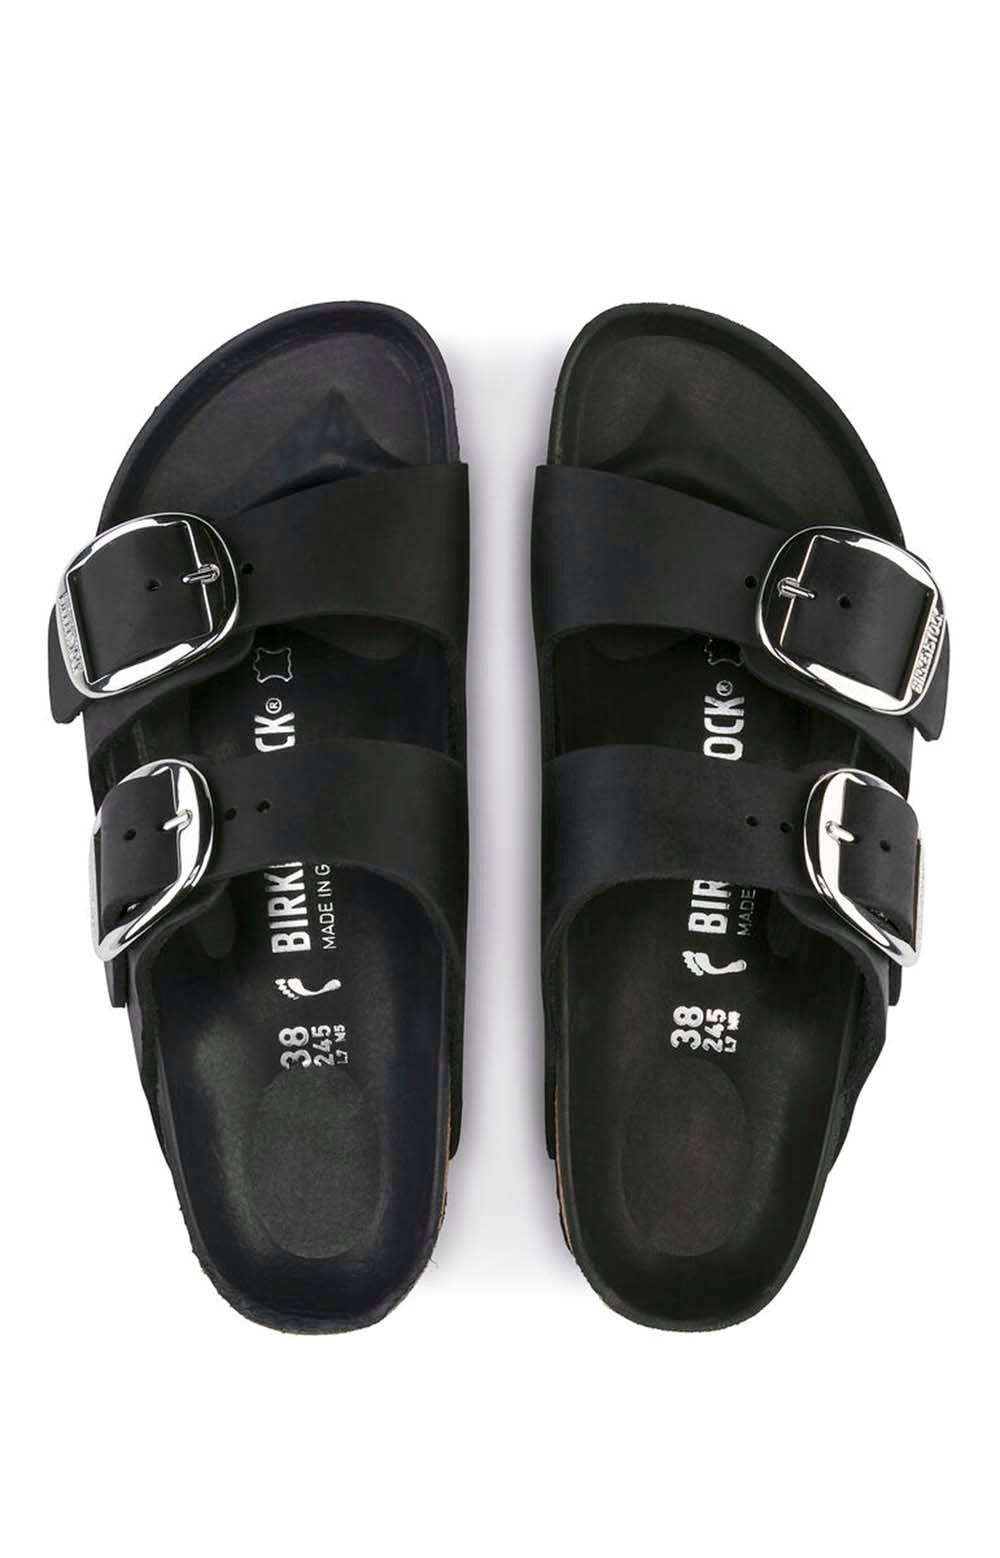 Premium quality Birkenstock Arizona Big Buckle Sandals designed for all-day comfort and support